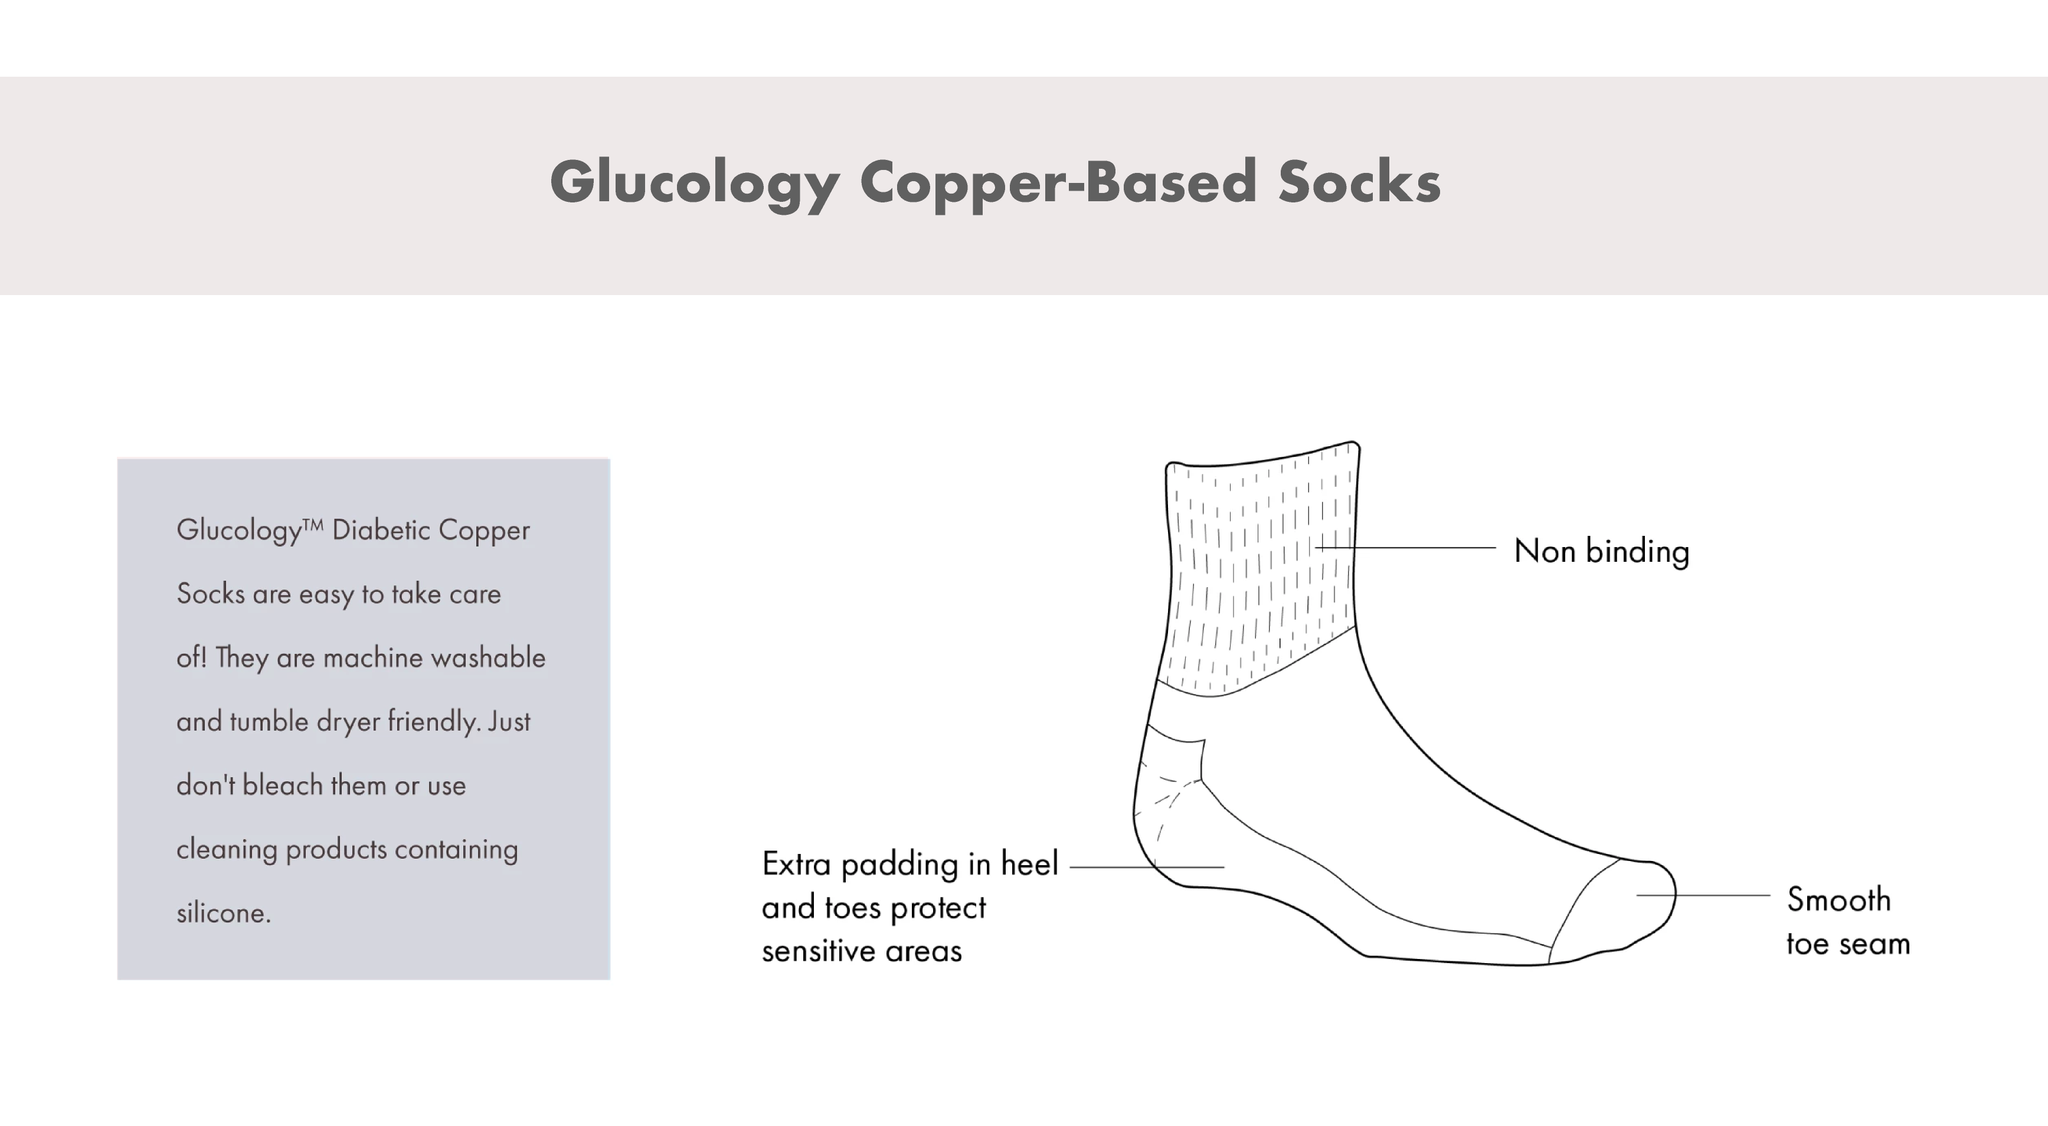 Diabetes support products accessories copper based socks instructions